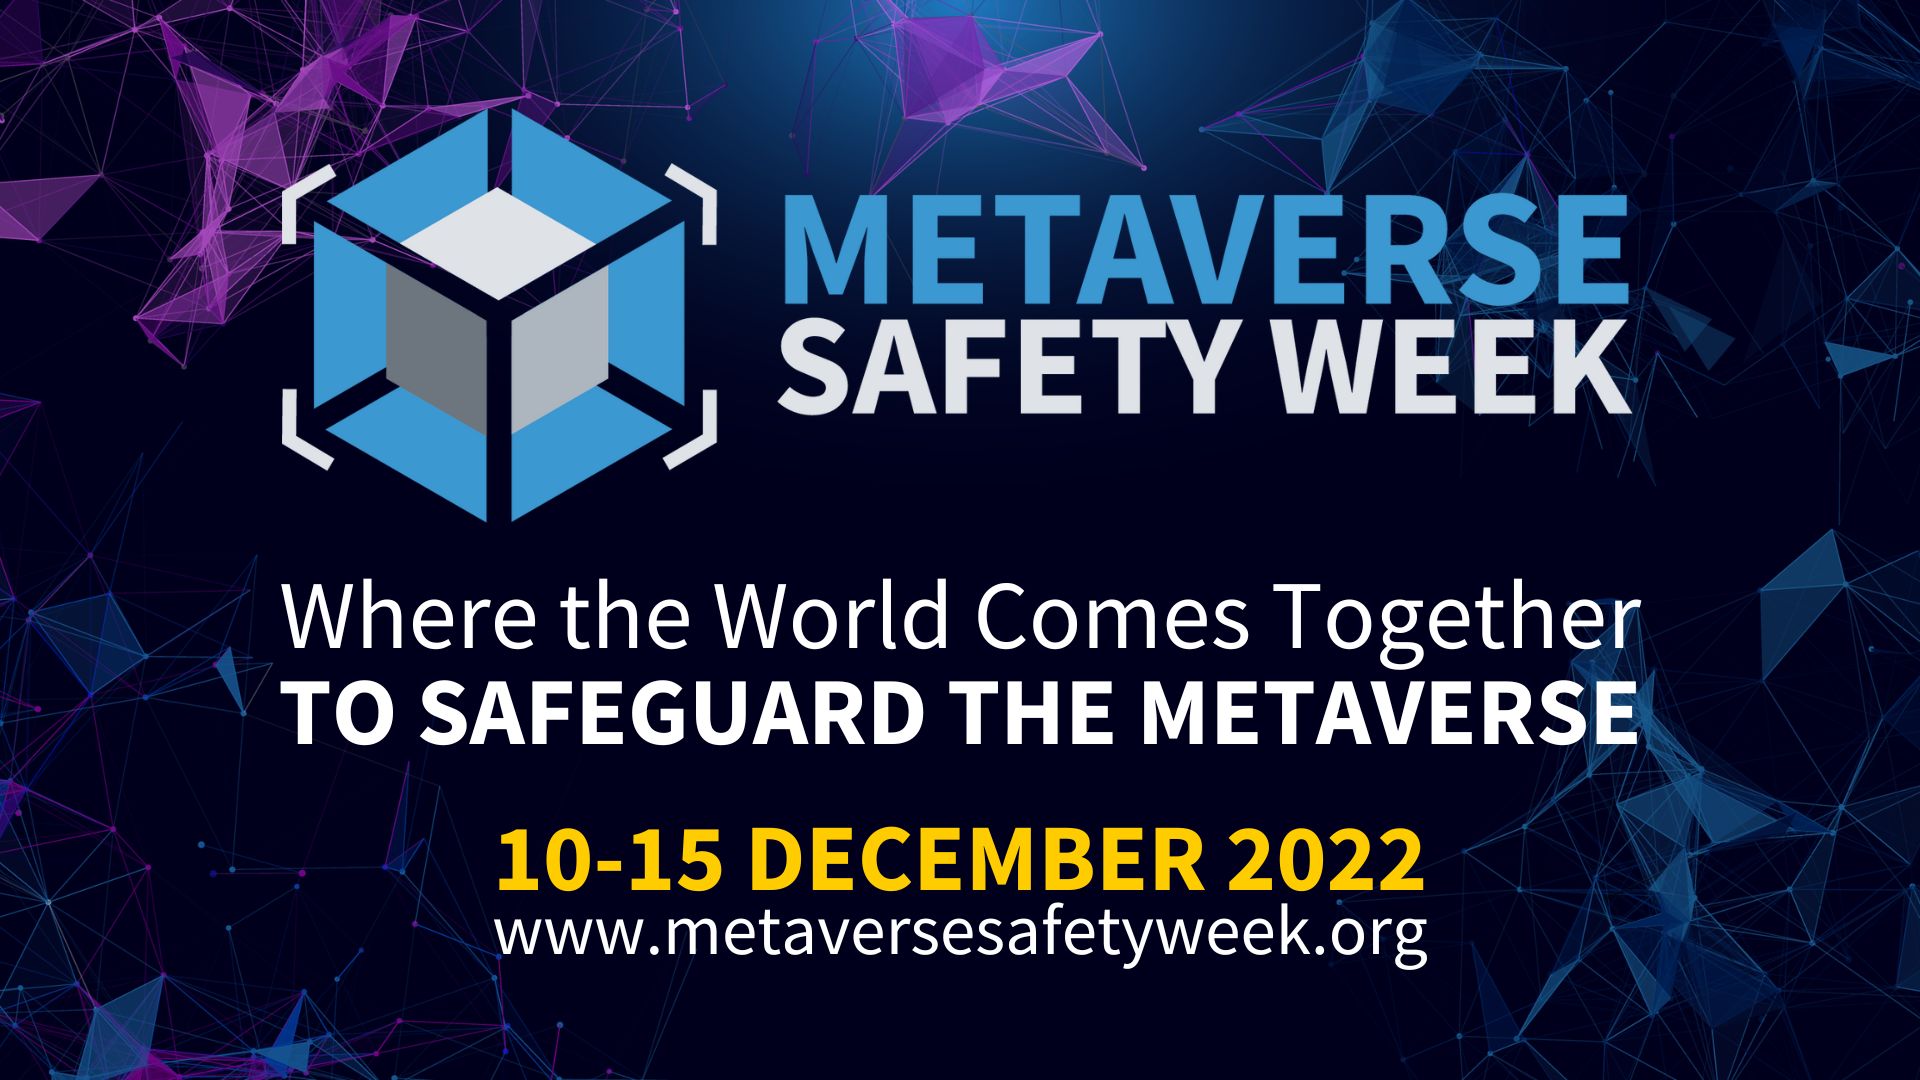 XR ASSOCIATION SHARES EFFORTS TO PROMOTE METAVERSE SAFETY AT XRSI SAFETY WEEK EVENT